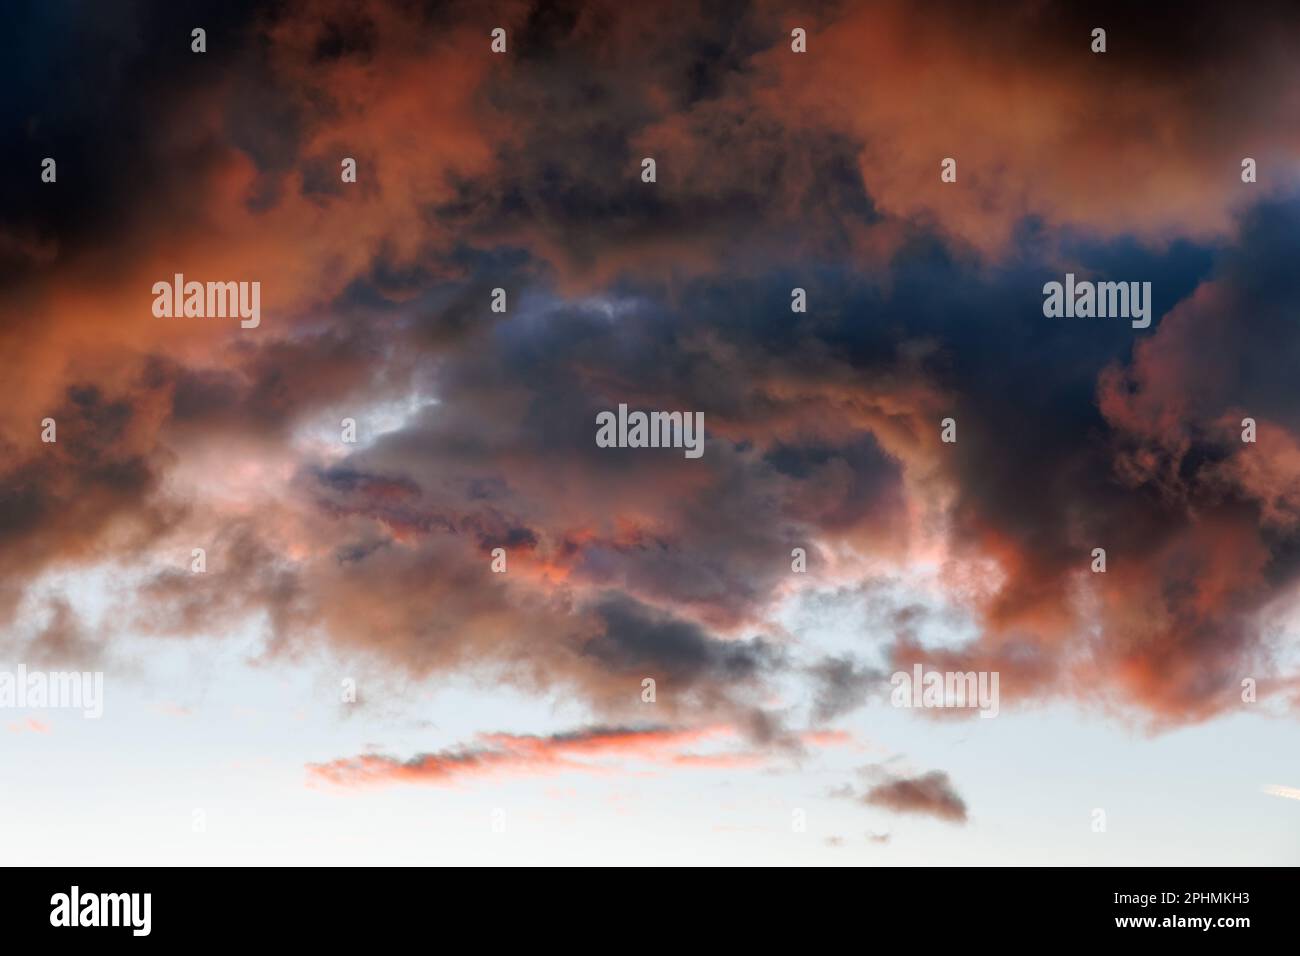 Fiery sunset clouds over Glasgow. Stock Photo